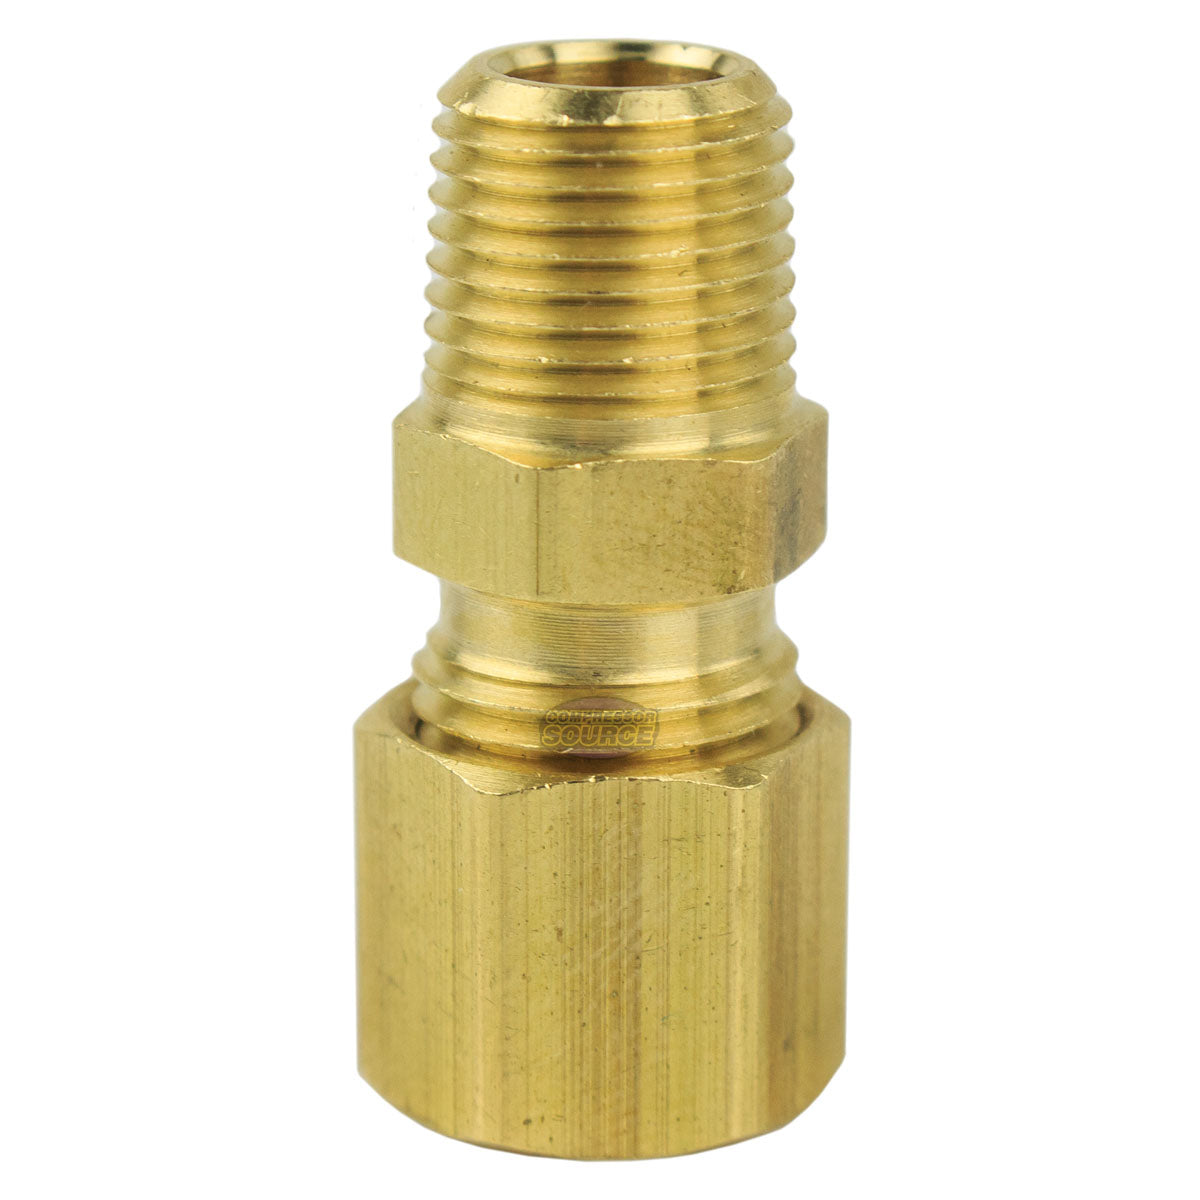 1/4" x 1/8" Compression x Male NPT Adapter Pipe Fitting Tube Connector Ferrule